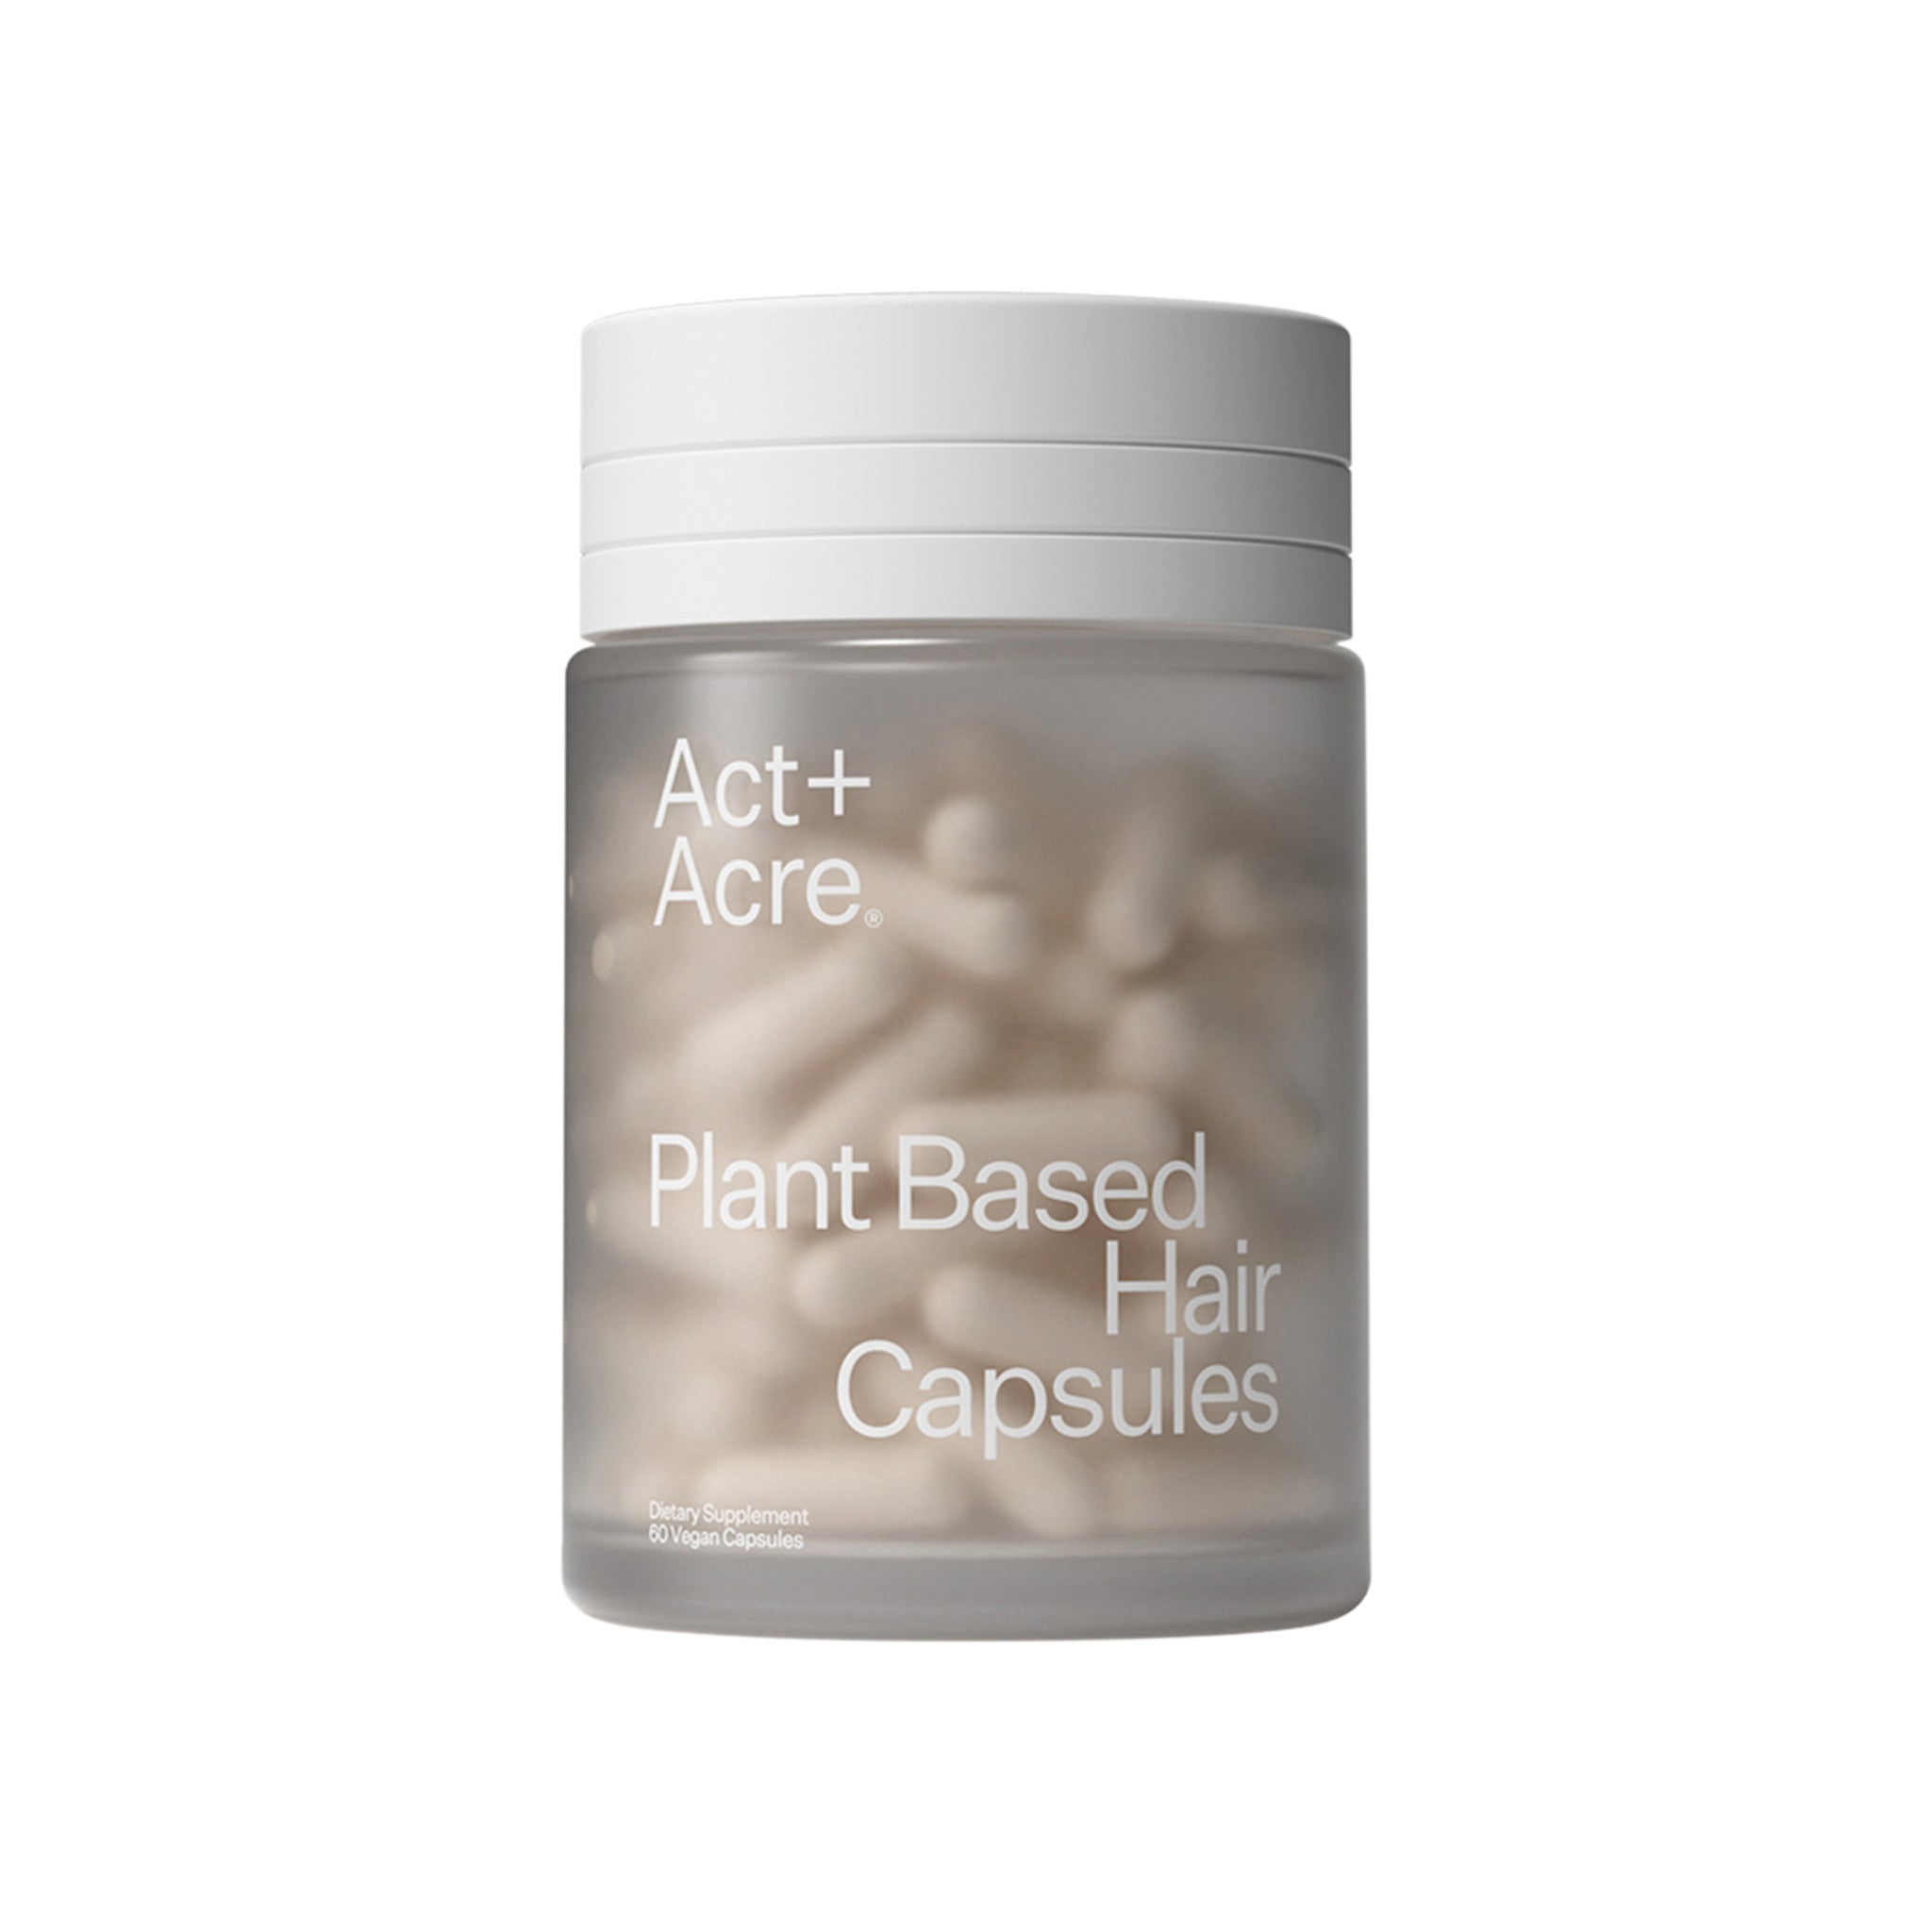 Act+Acre Cold Processed Plant Based Hair Capsules main image.